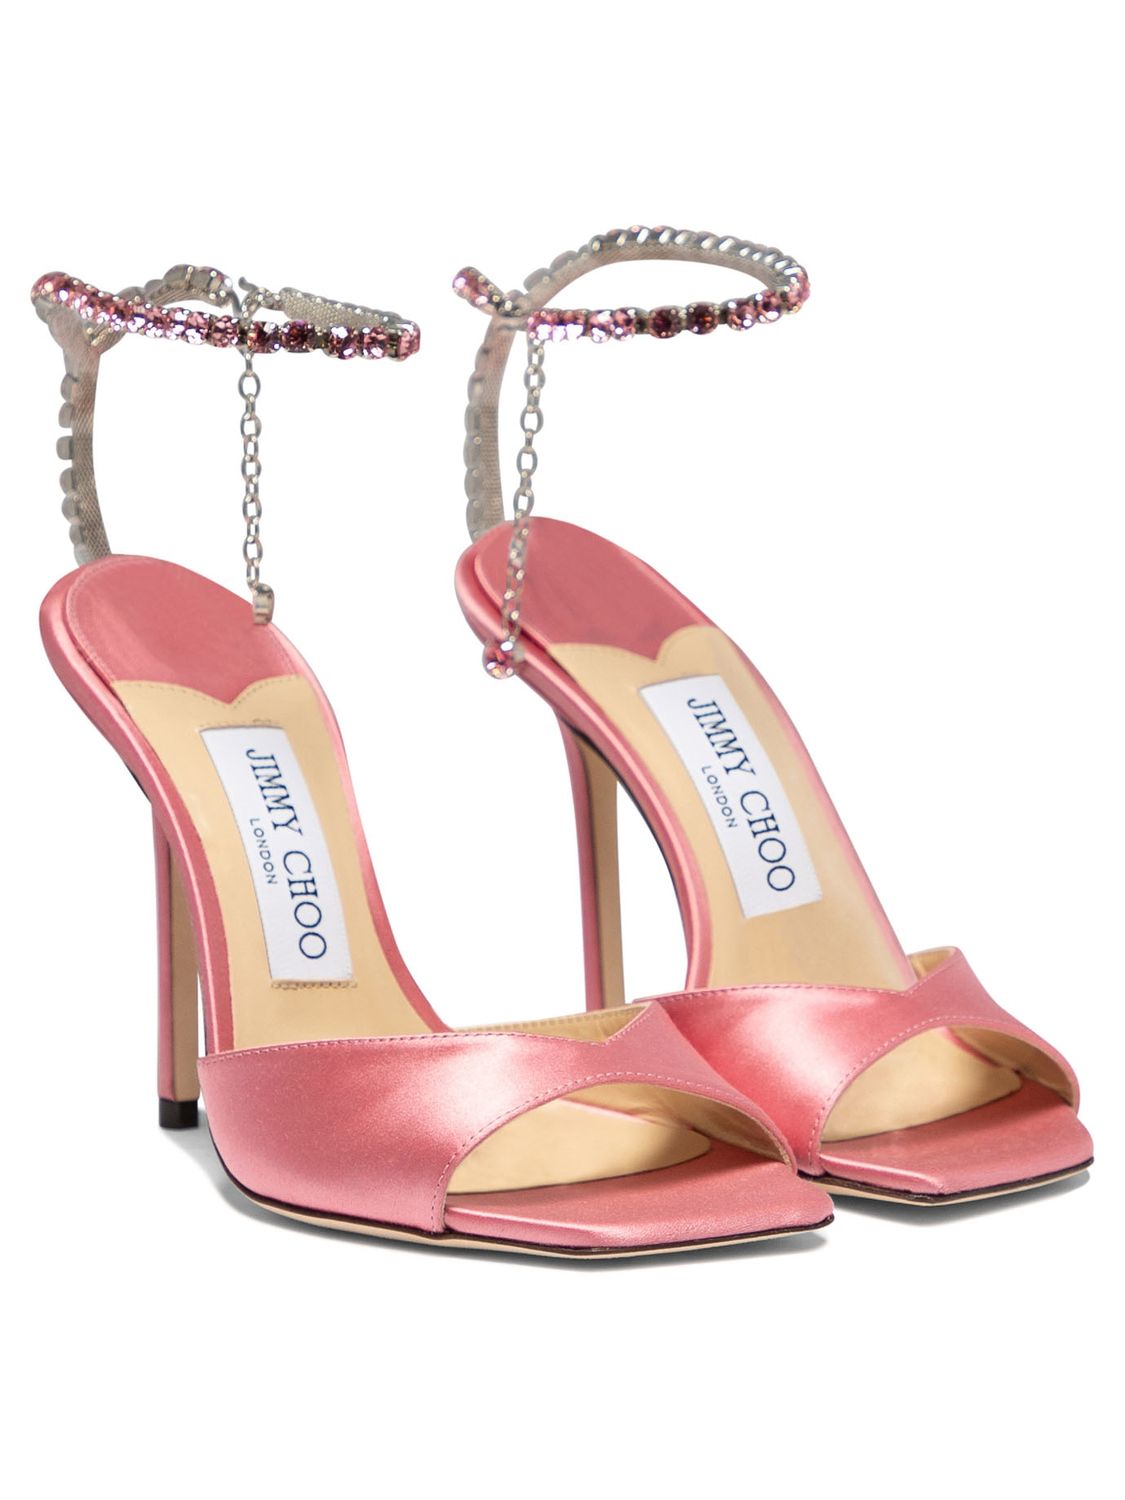 JIMMY CHOO Luxurious Satin and Leather Sandals for Women in Pretty Pink